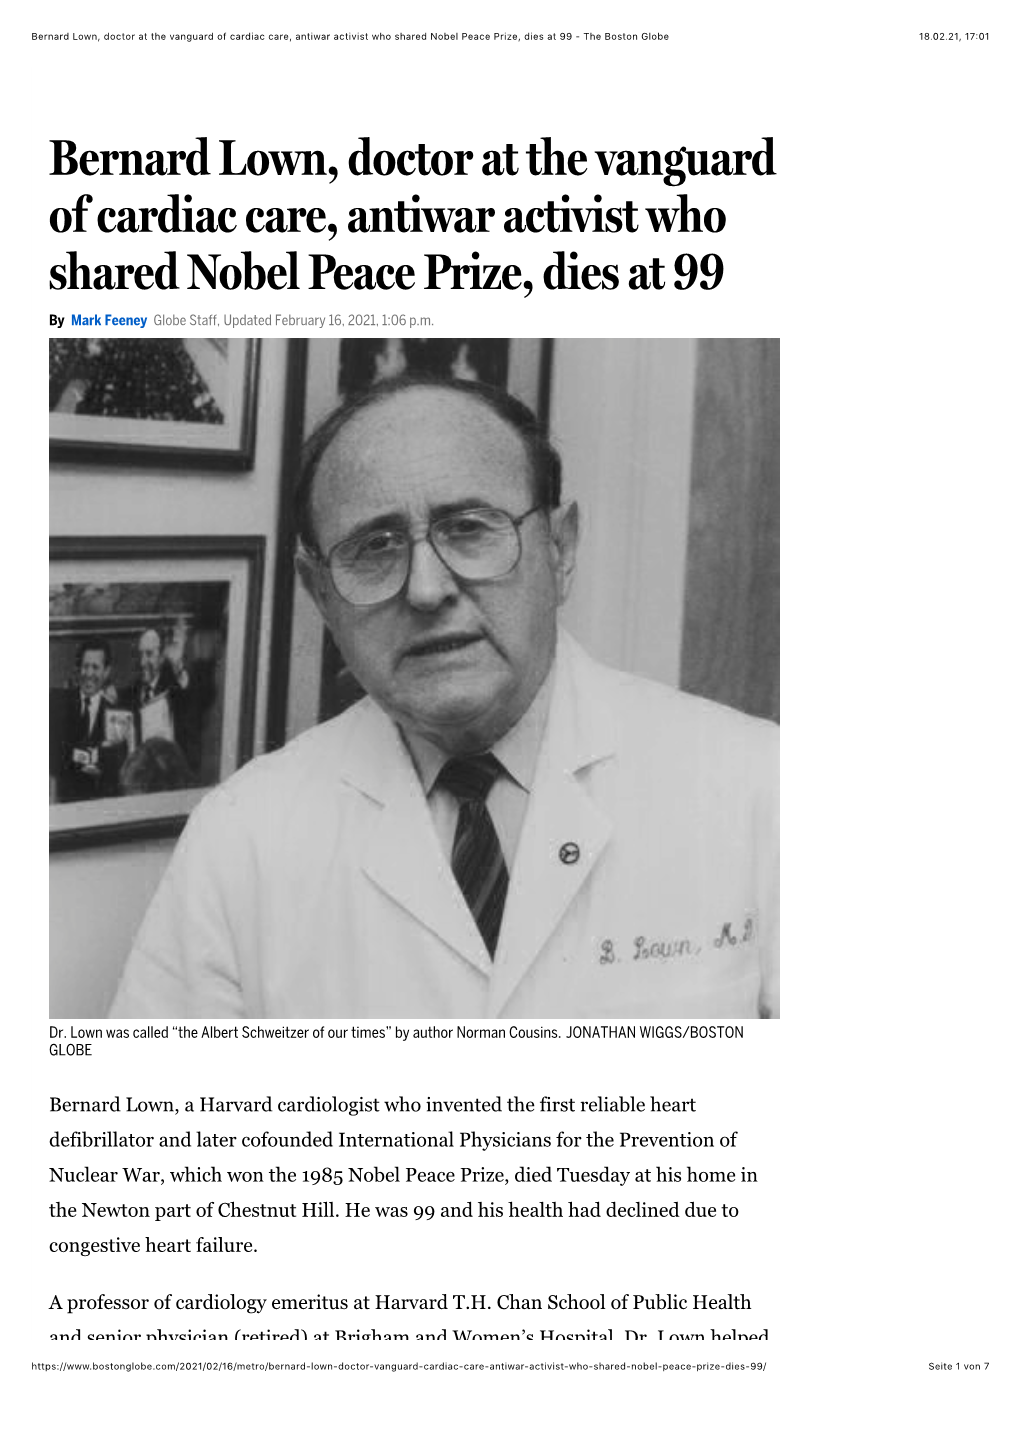 Bernard Lown, Doctor at the Vanguard of Cardiac Care, Antiwar Activist Who Shared Nobel Peace Prize, Dies at 99 - the Boston Globe 18.02.21, 17�01